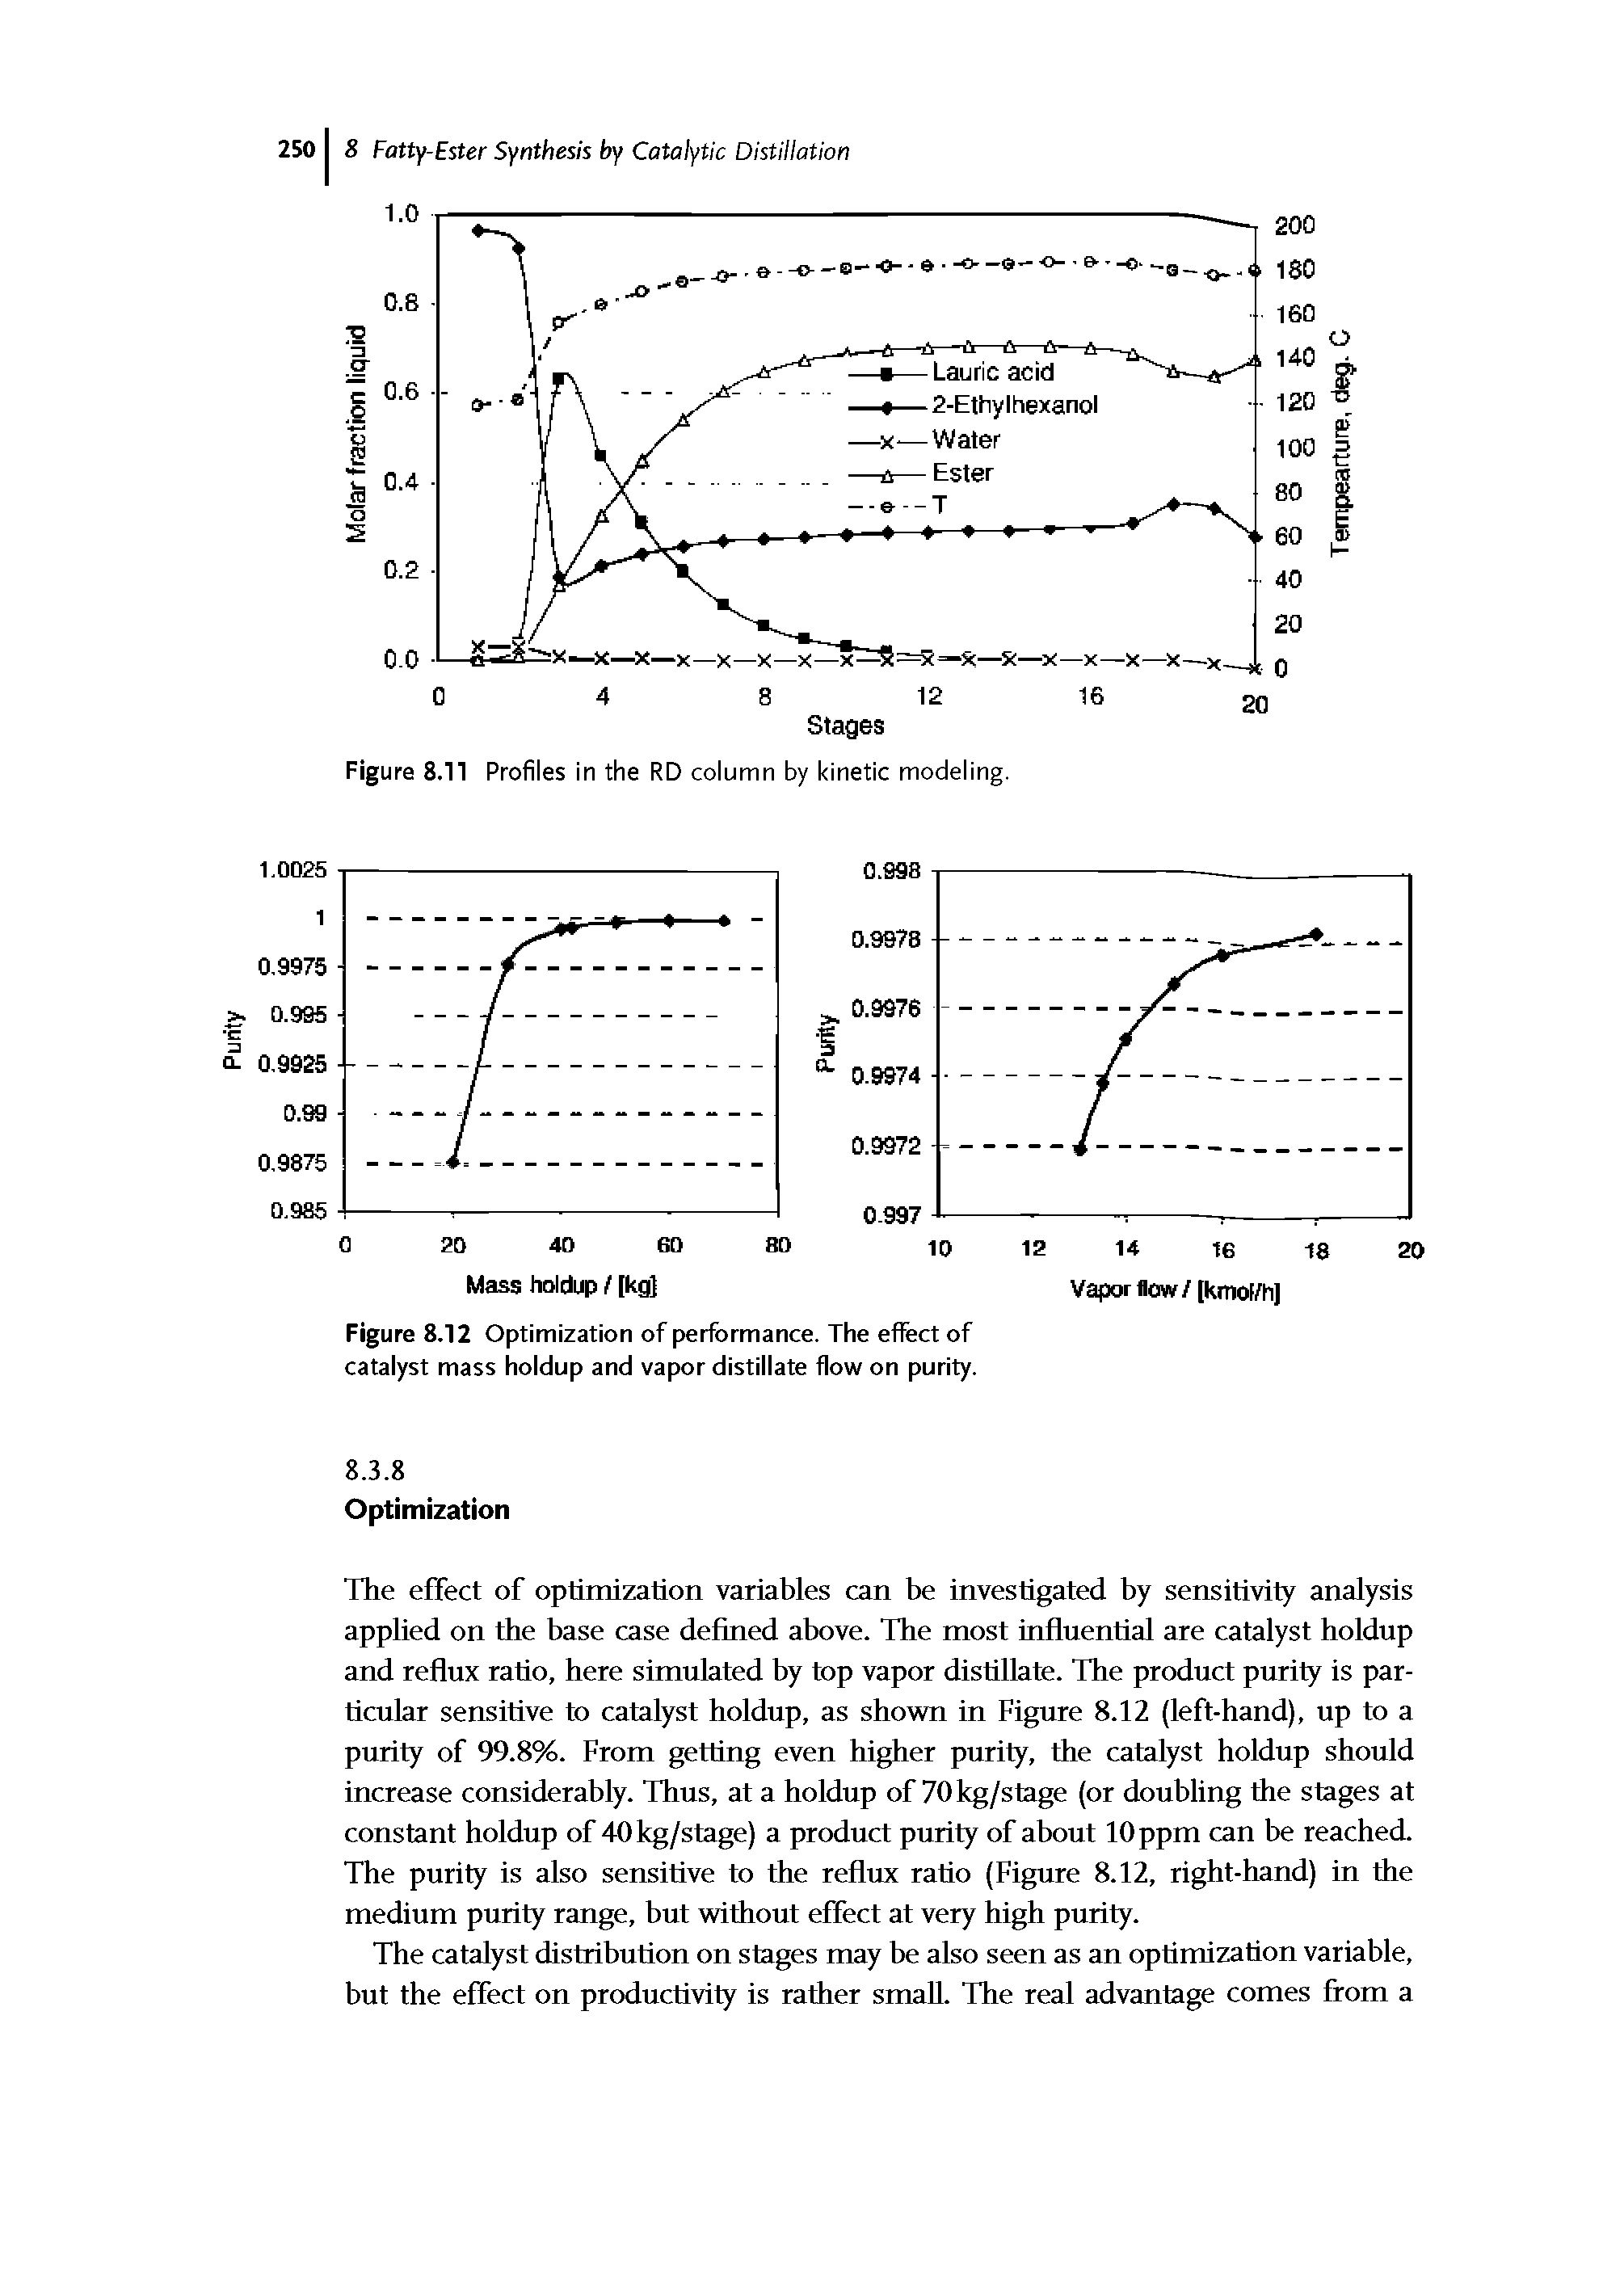 Figure 8.12 Optimization of performance. The effect of catalyst mass holdup and vapor distillate flow on purity.